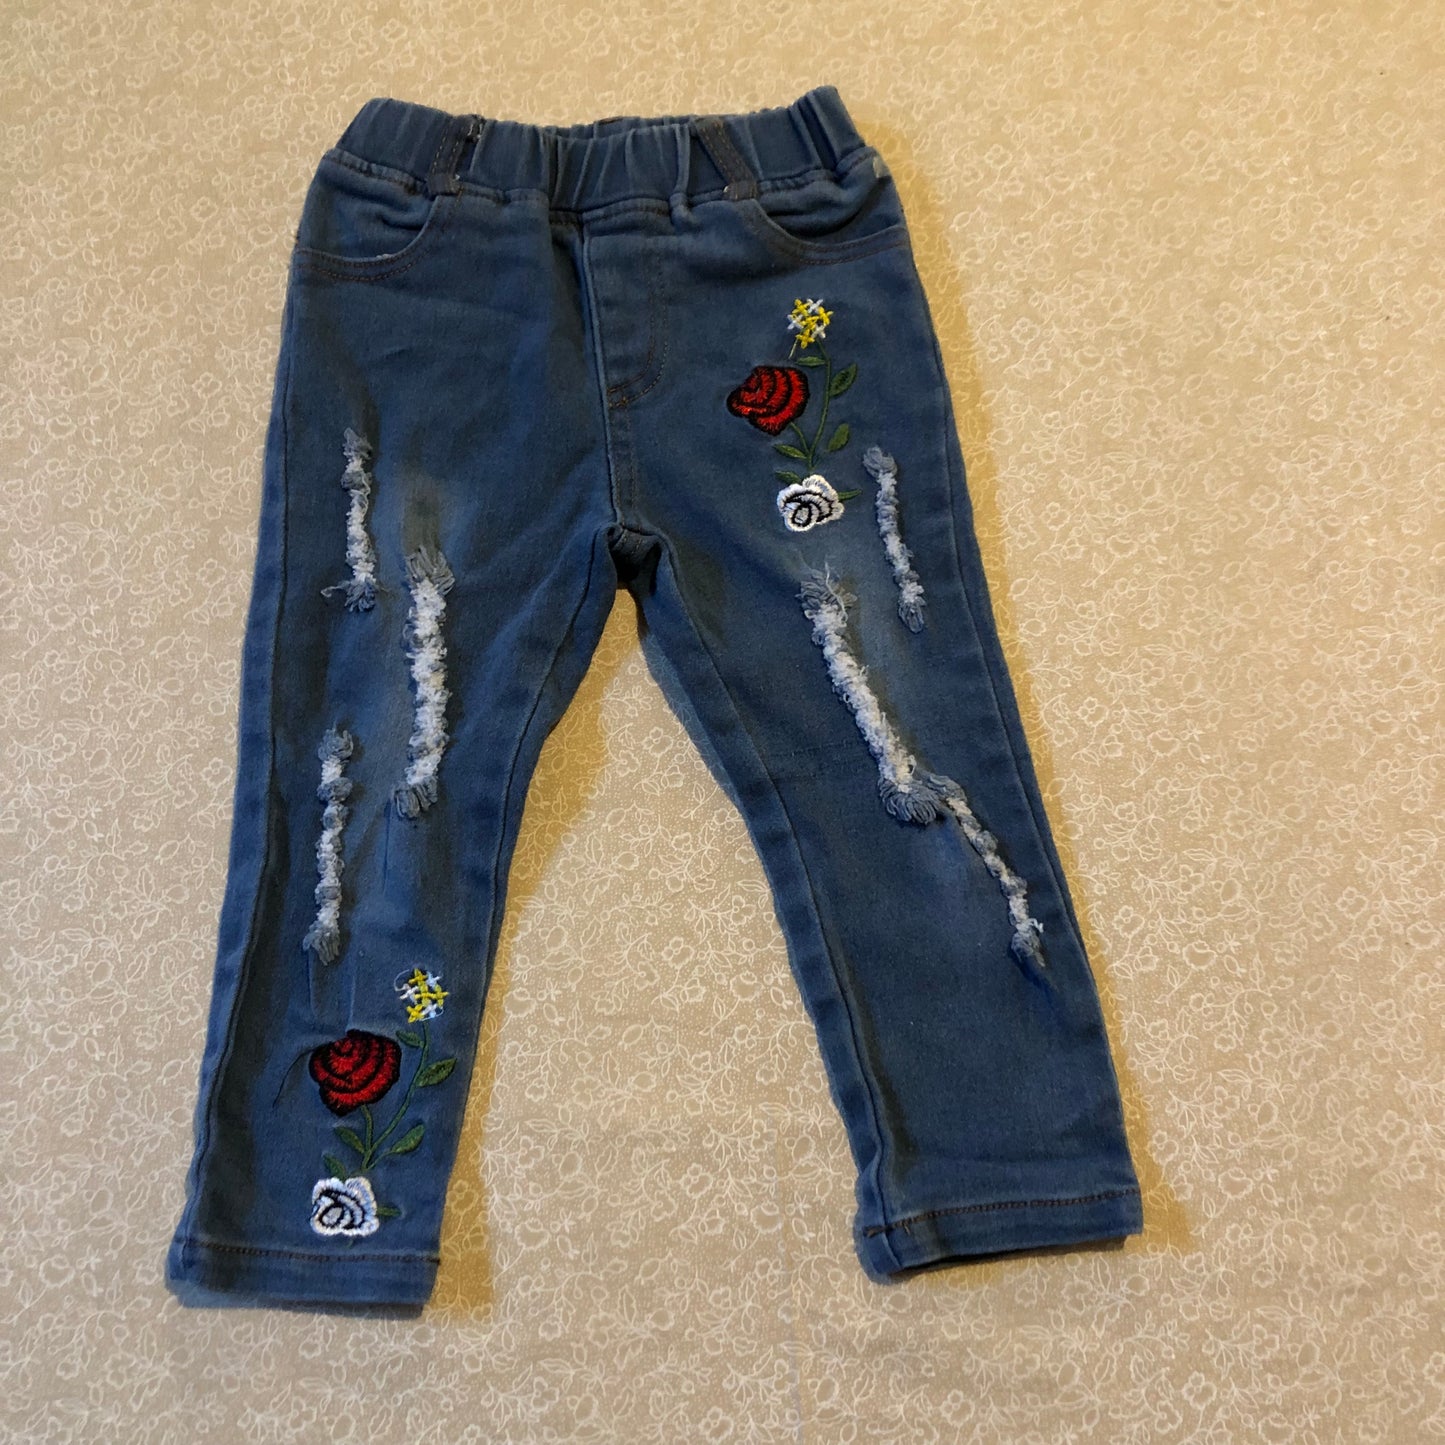 18-months-pants-no-name-jeans-ripped-flowers